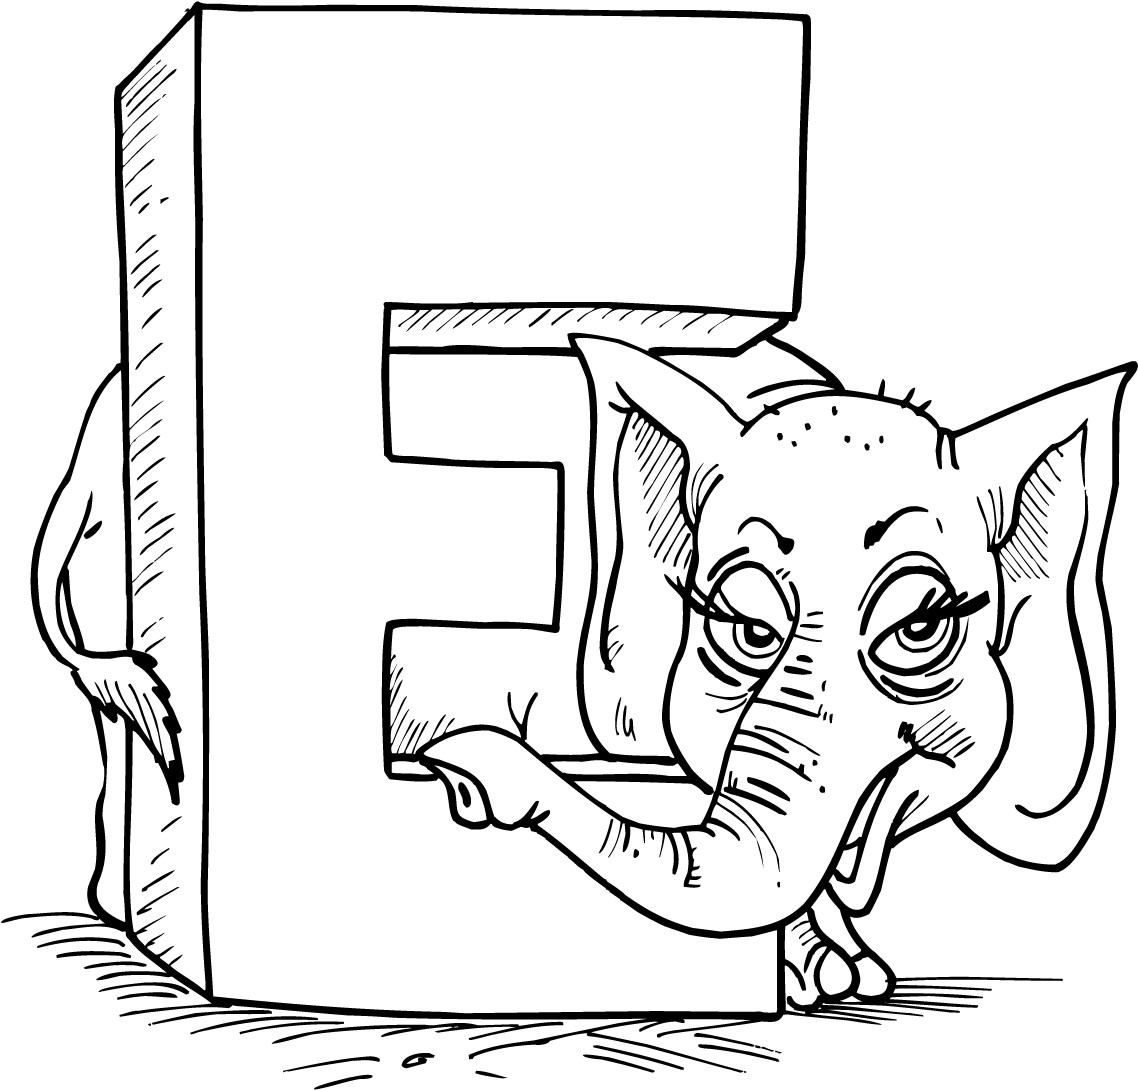 E Coloring Pages
 coloring page of letter e with an elephant